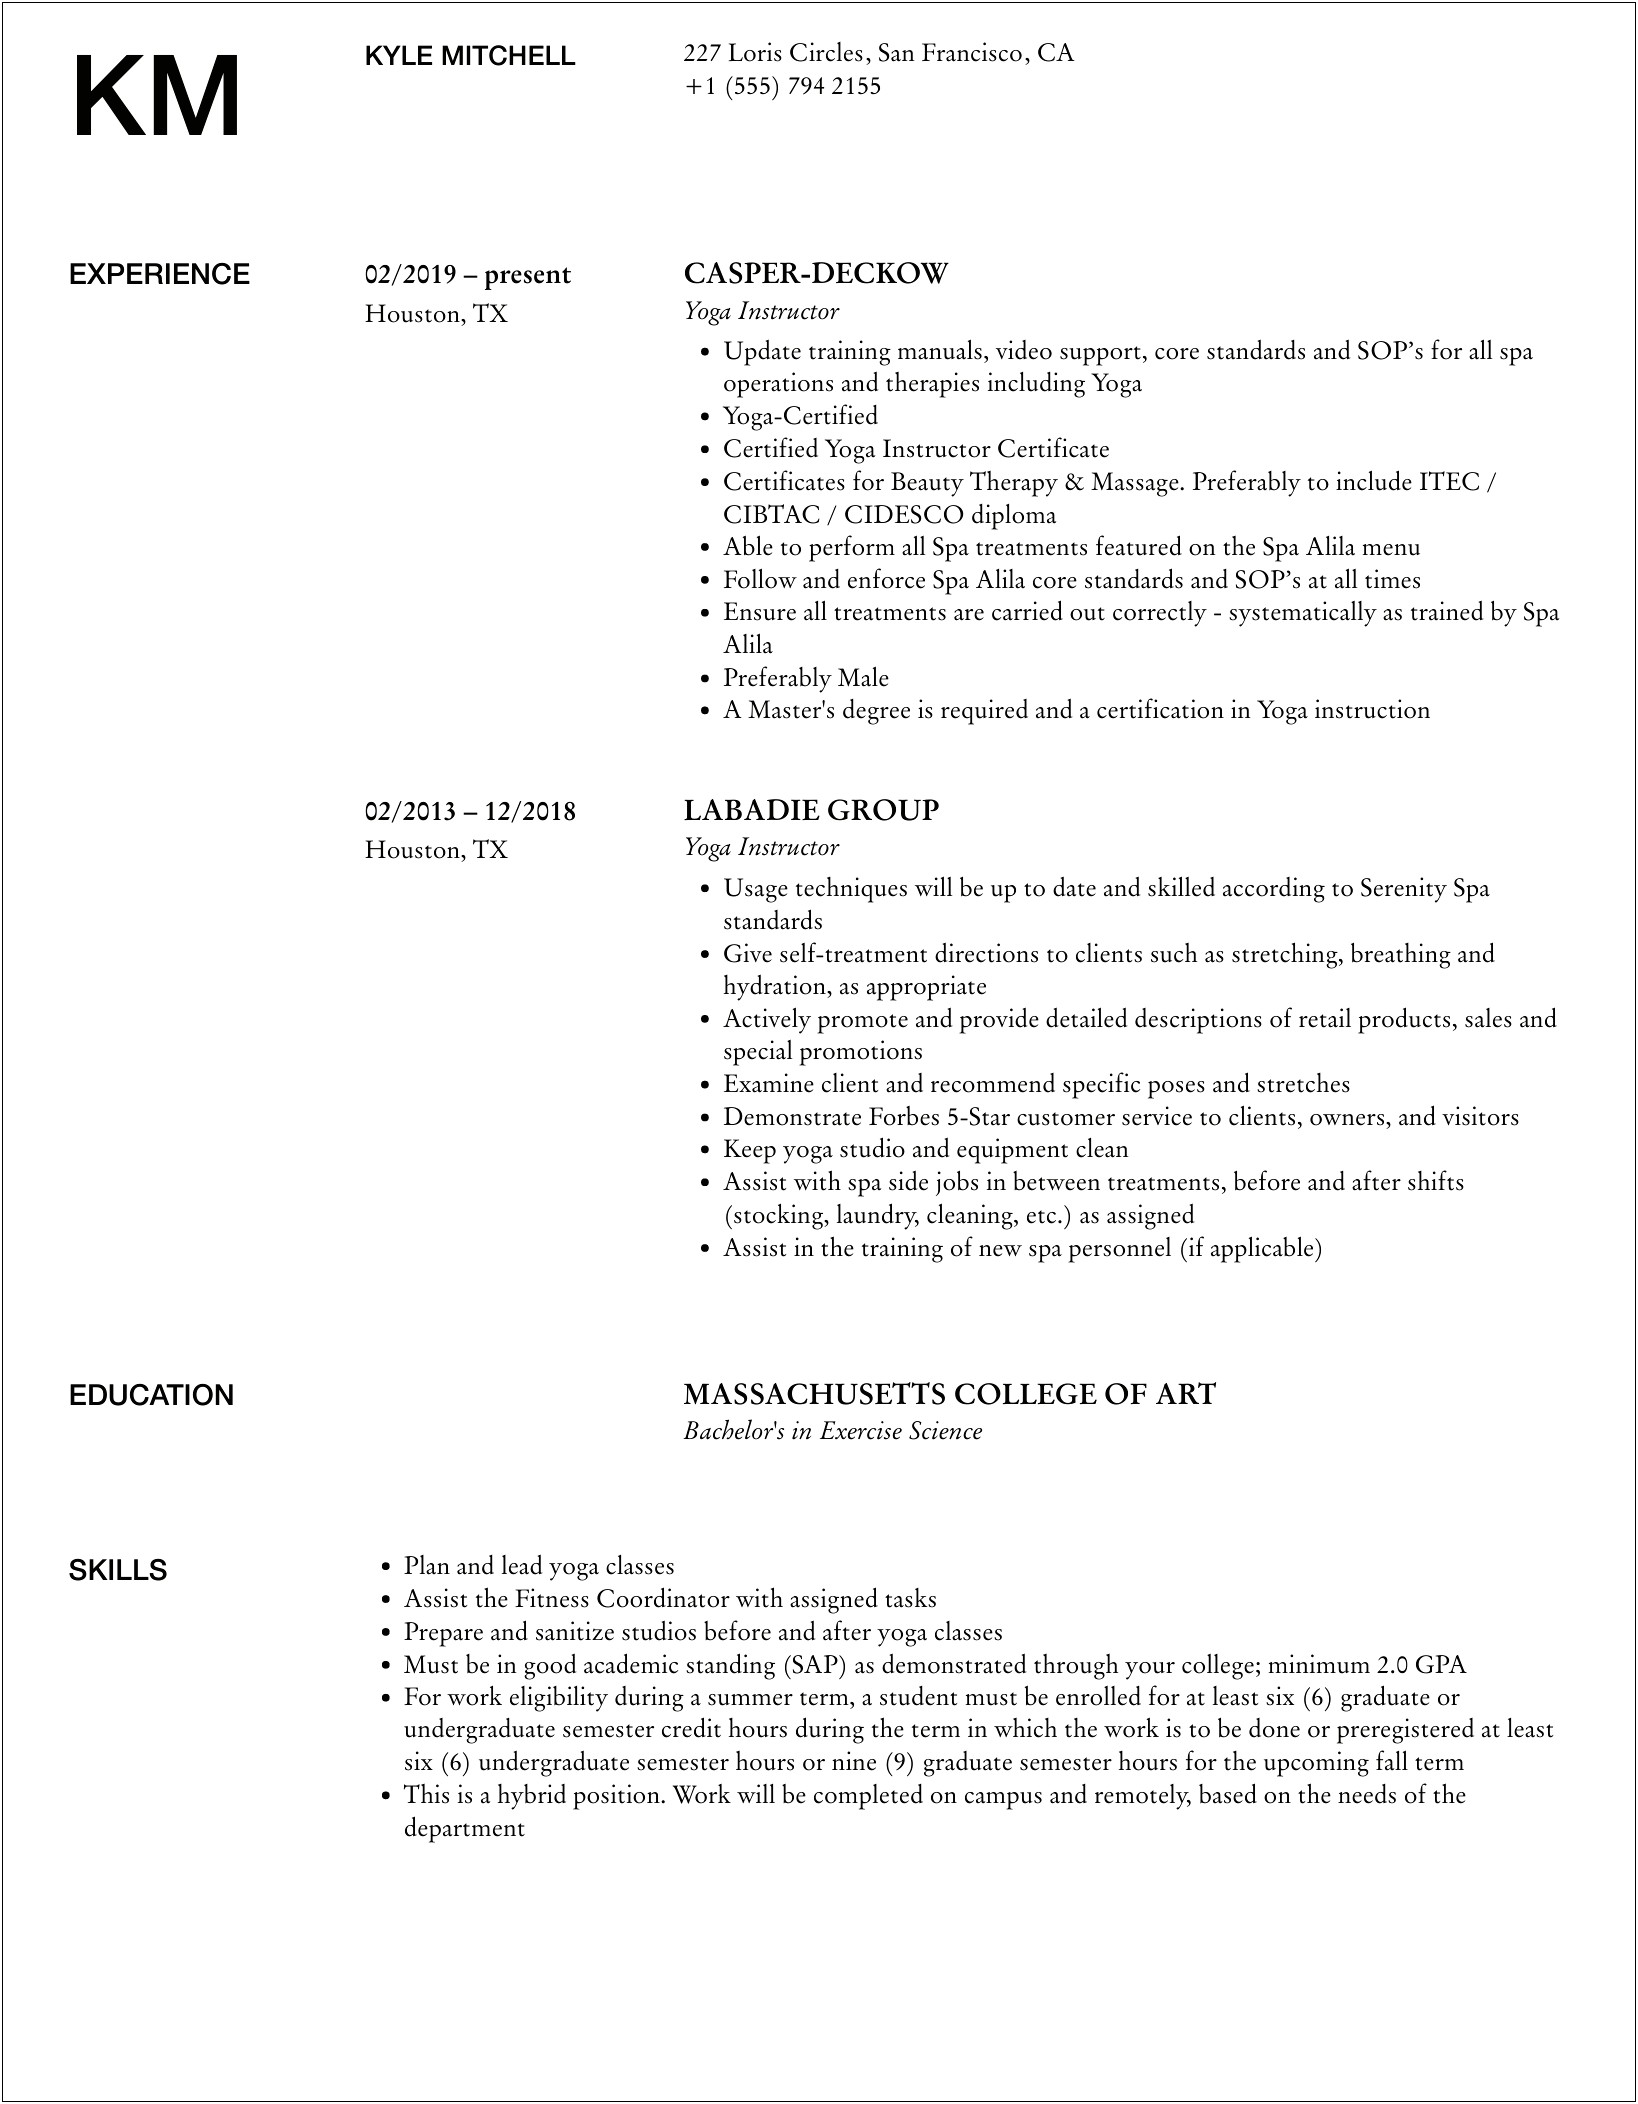 Resume For A Yoga Instructor With Little Experience